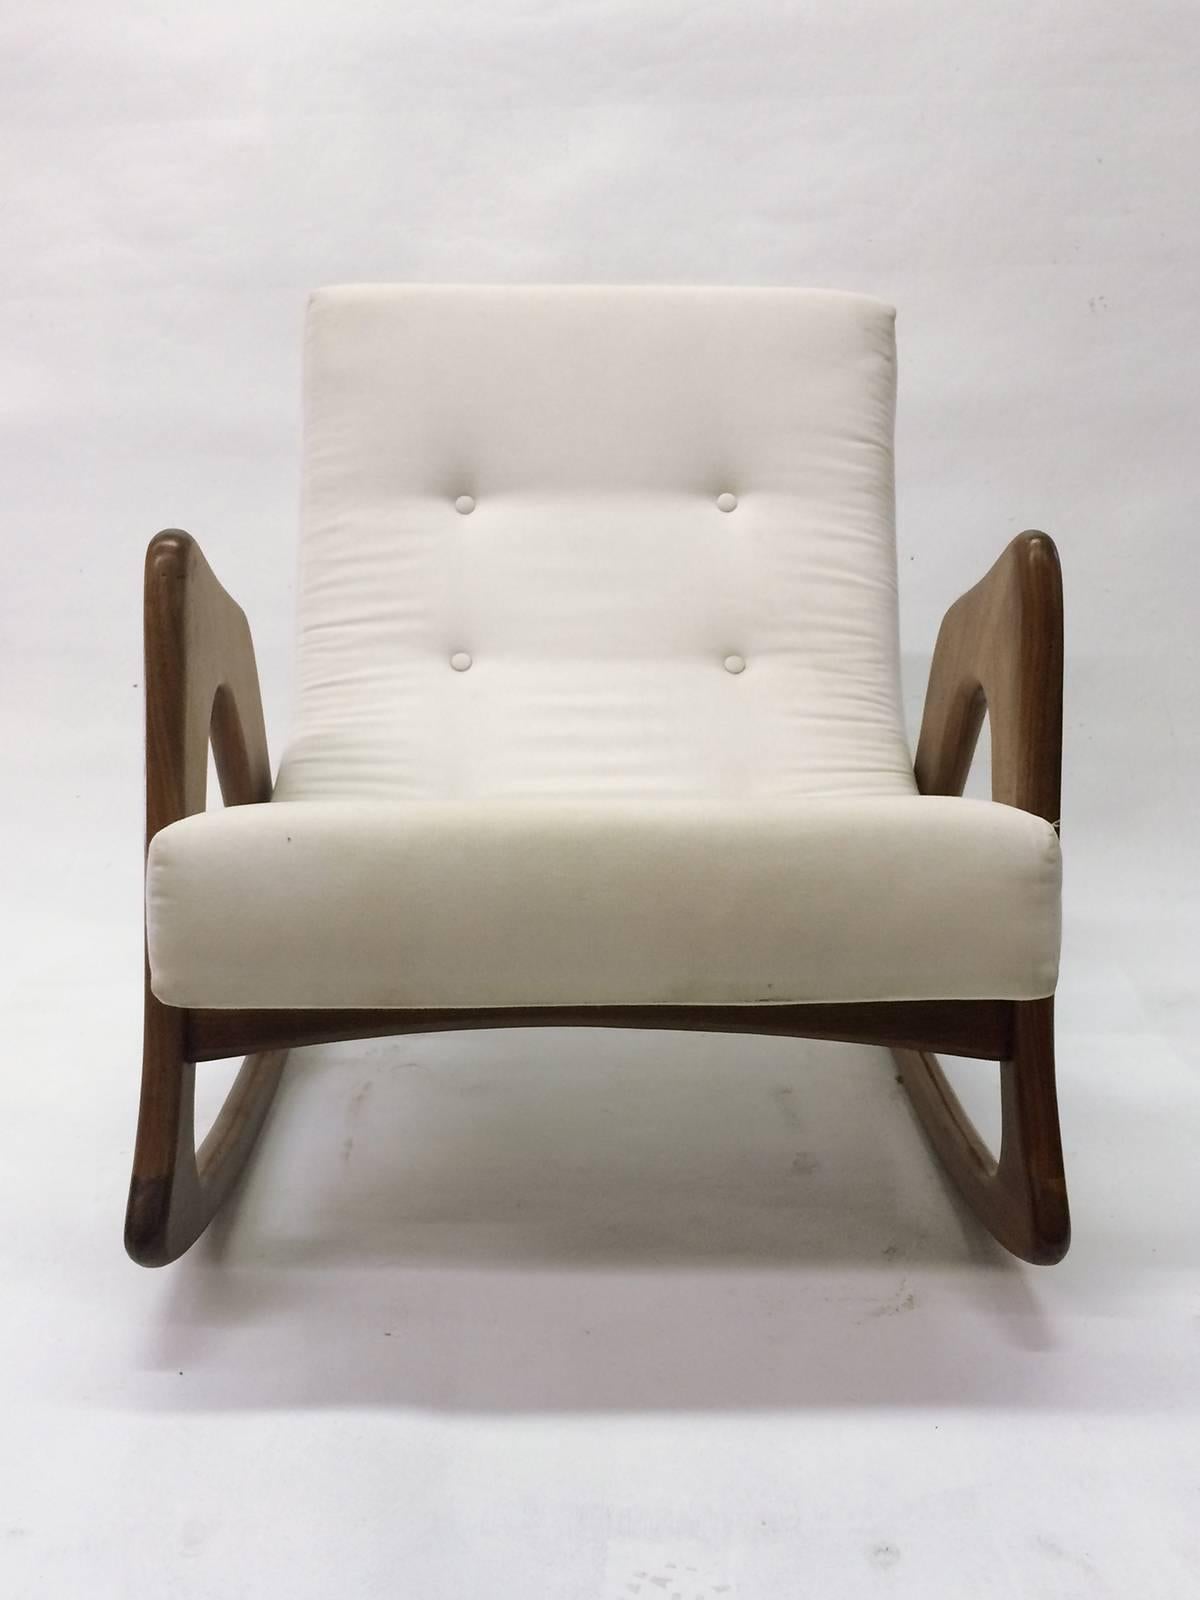 American Midcentury Rocking Chair by Adrian Pearsall for Craft Associates